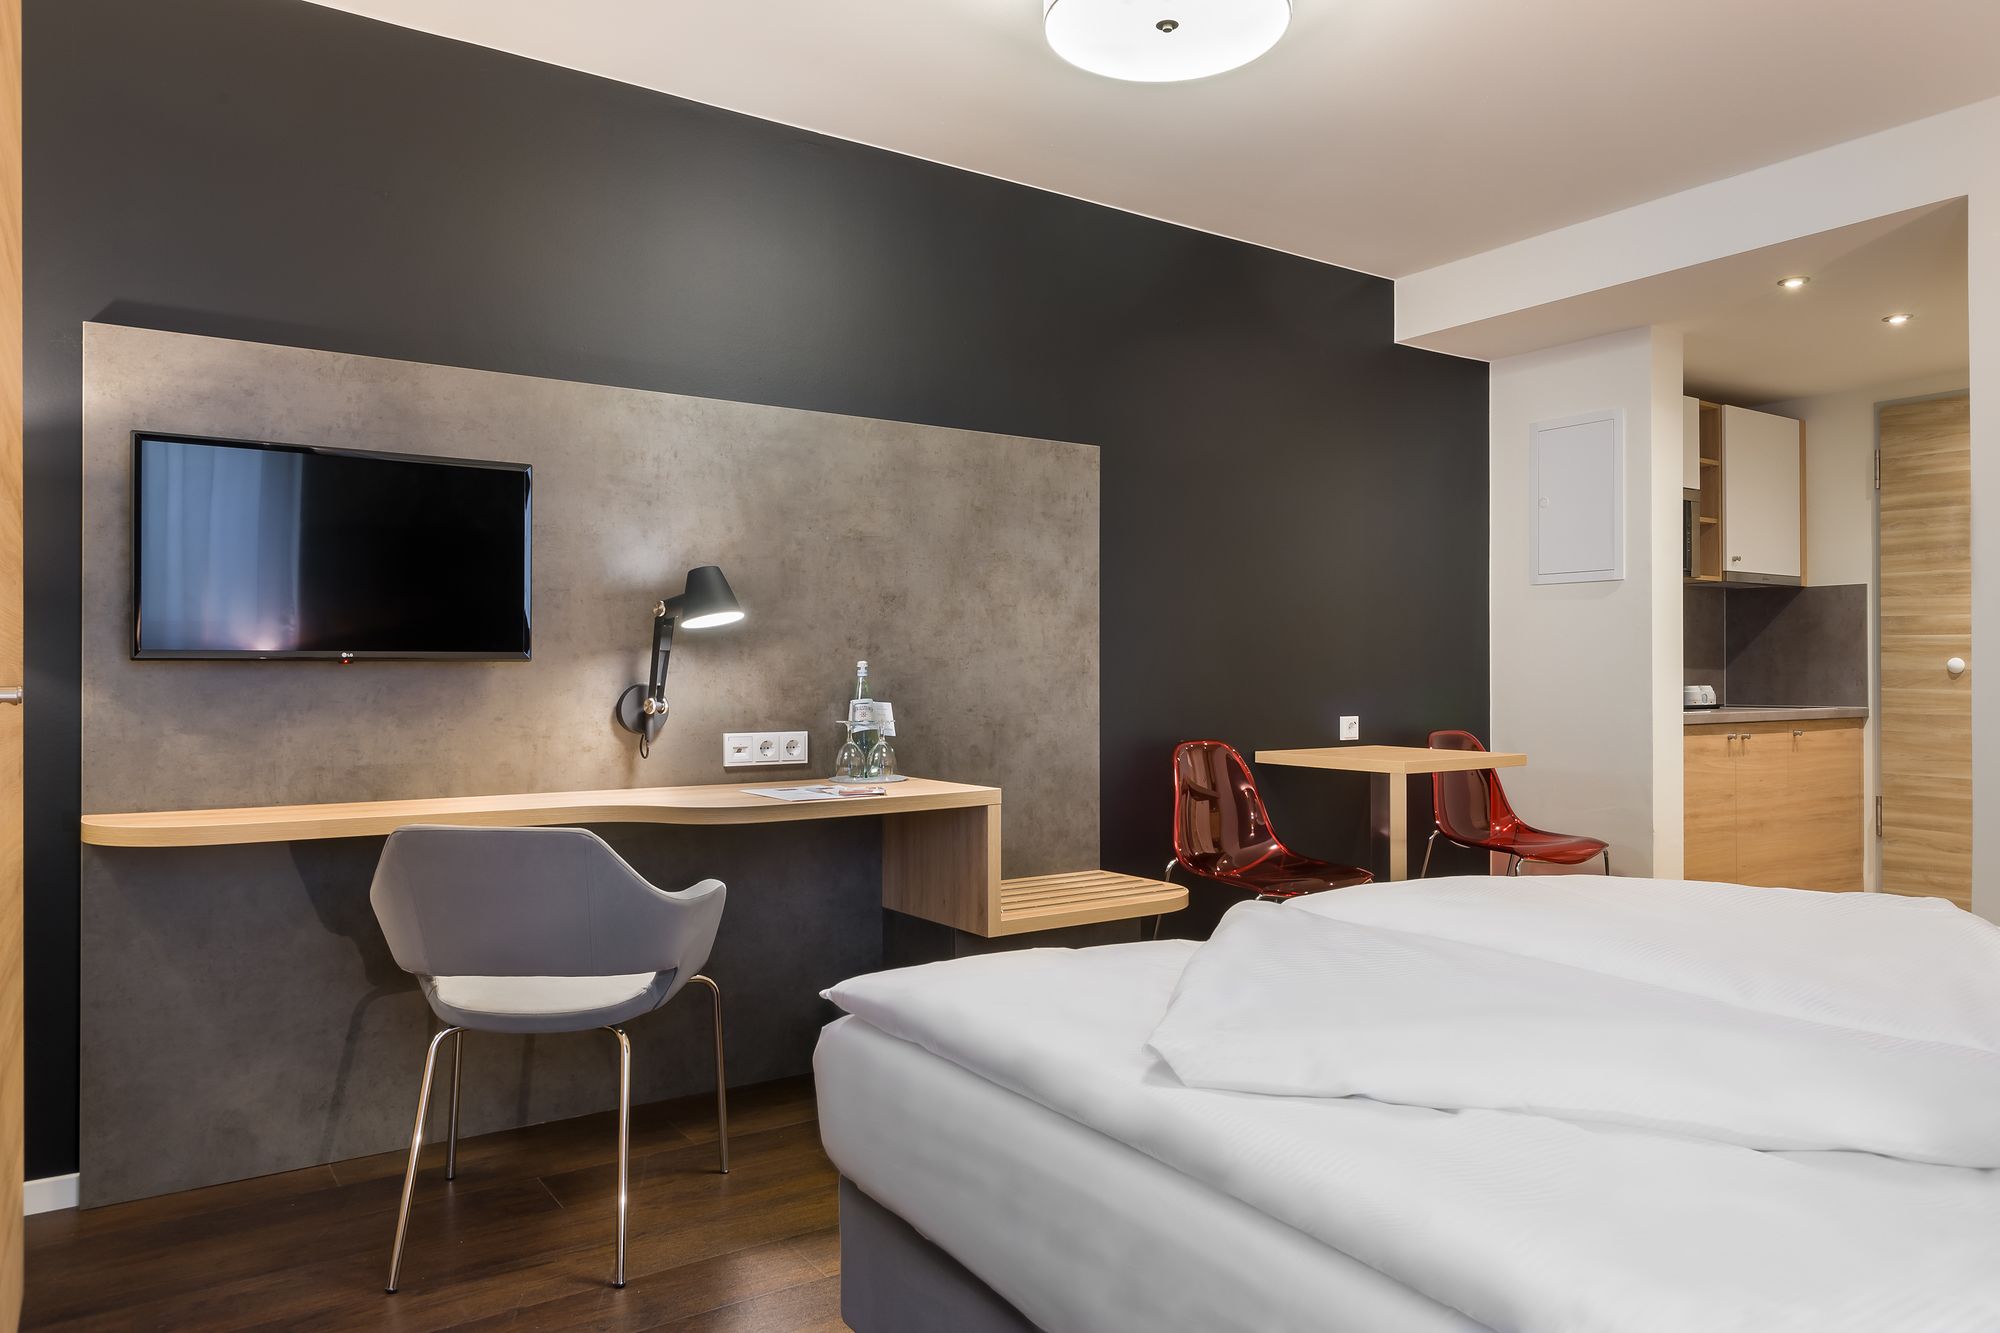 Novum Hotel East Apartments <br/>83.33 ew <br/> <a href='http://vakantieoplossing.nl/outpage/?id=9c38ab639c4d40675fcf6c927ab4b41a' target='_blank'>View Details</a>